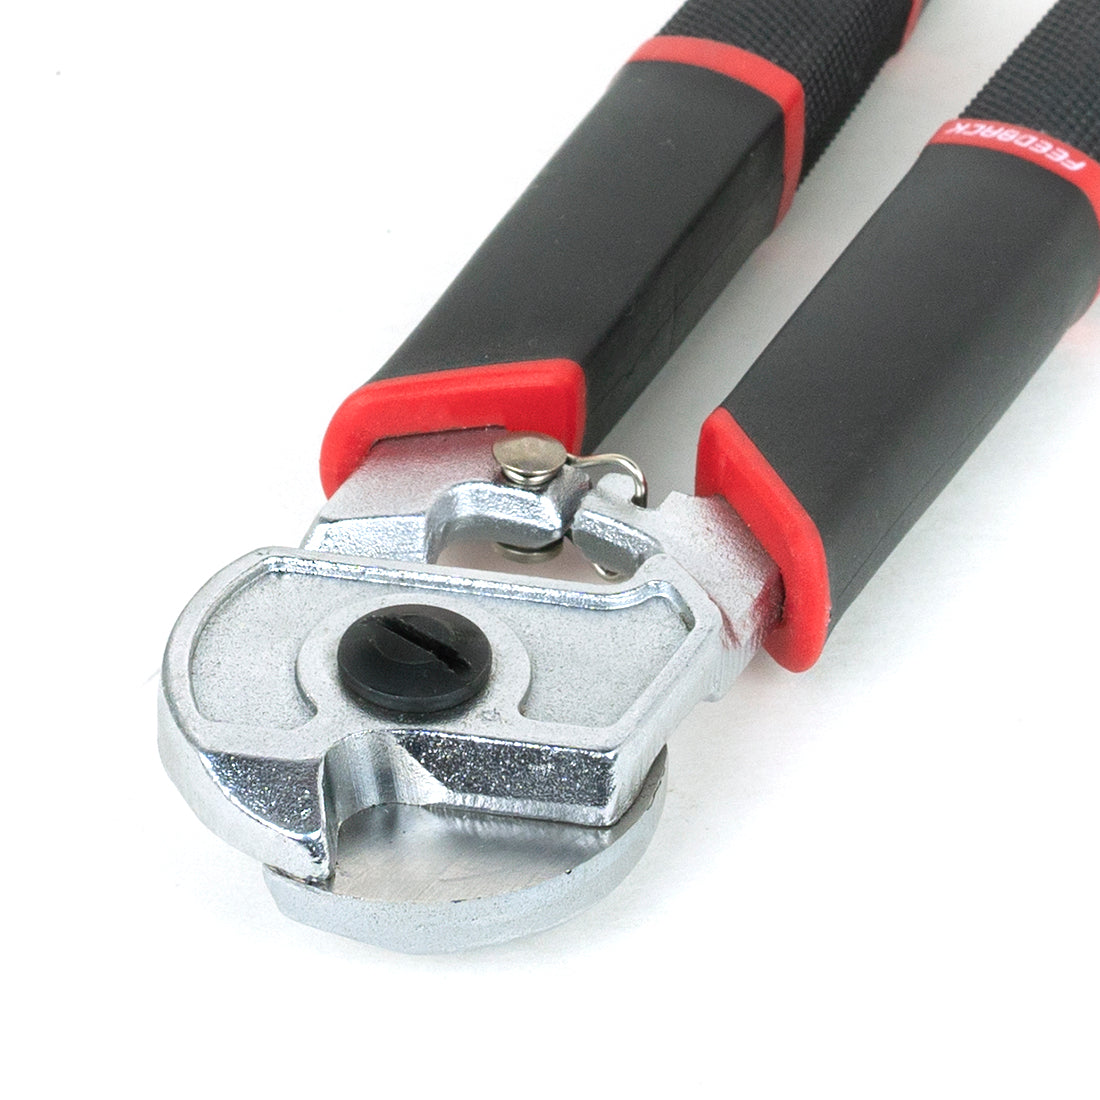 Cable and Housing Cutter